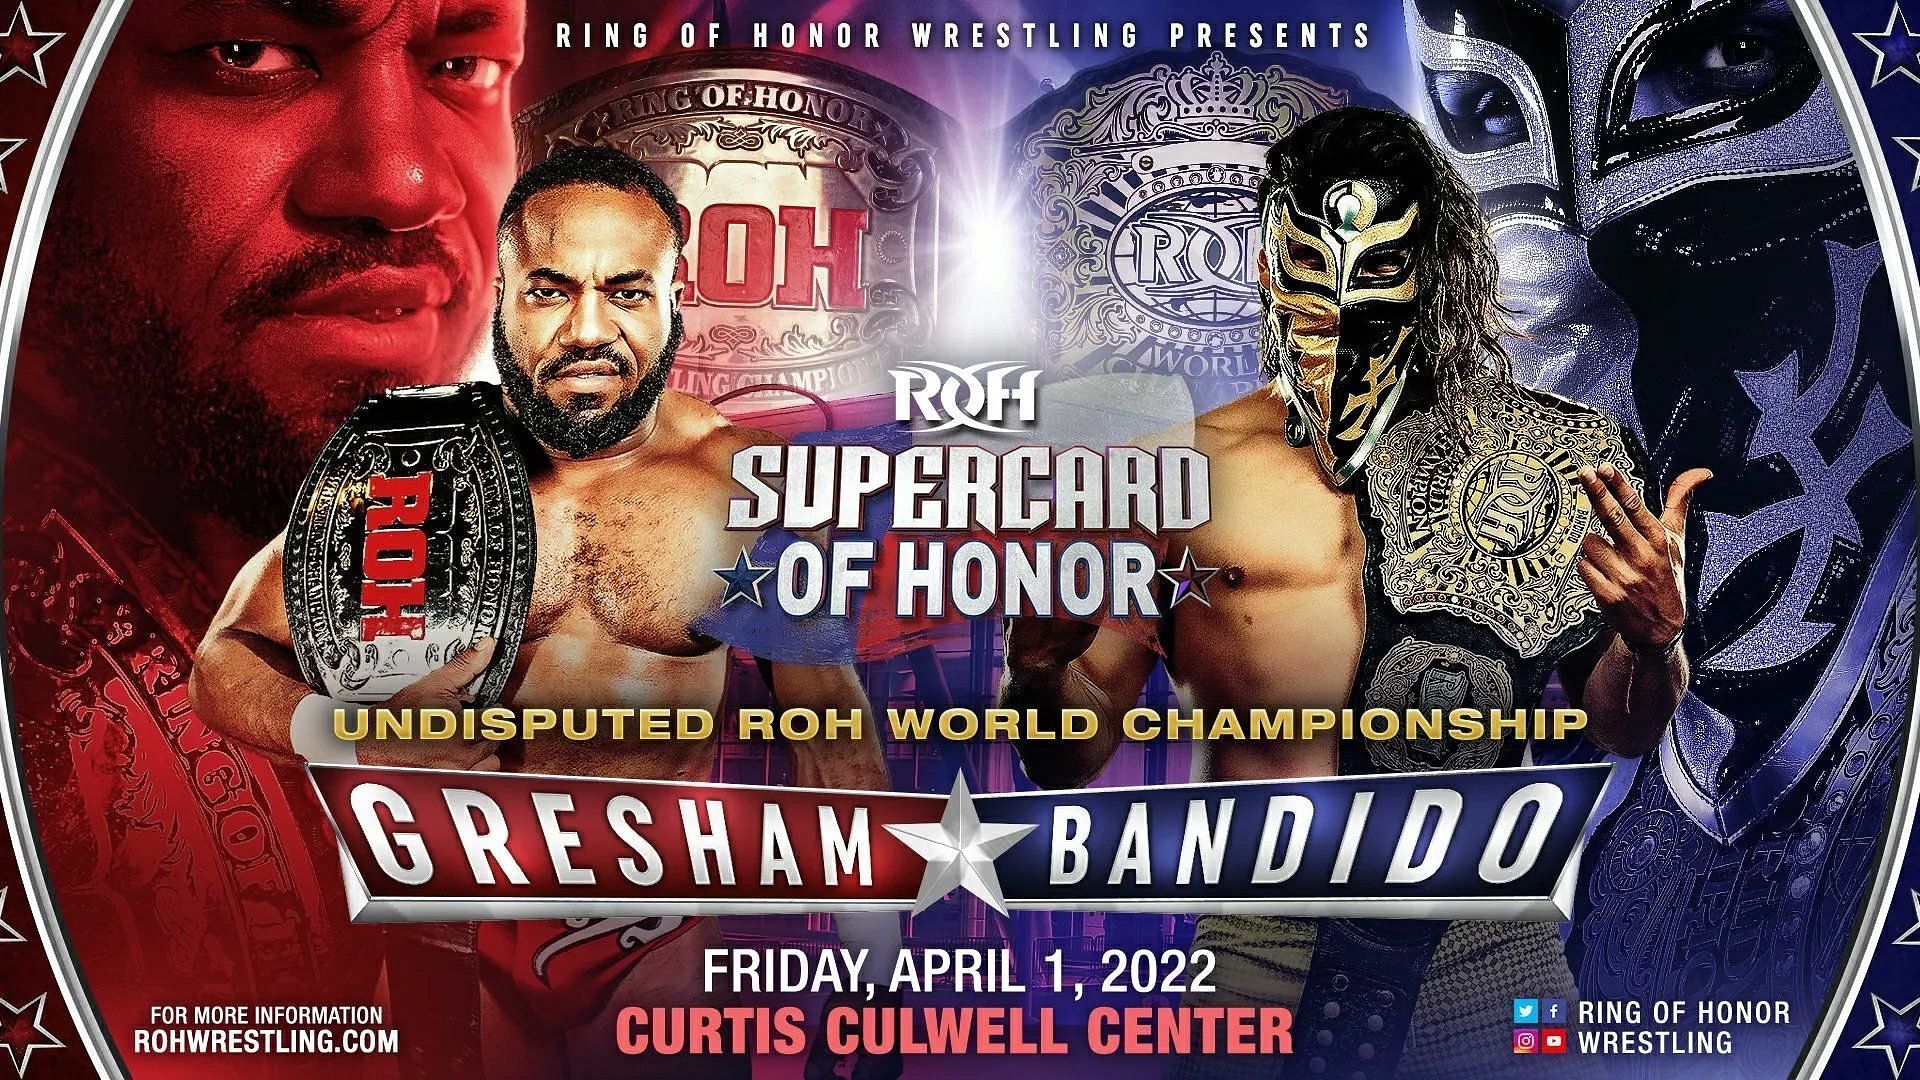 ROH Supercard of Honor XV will take place on April 1, 2022